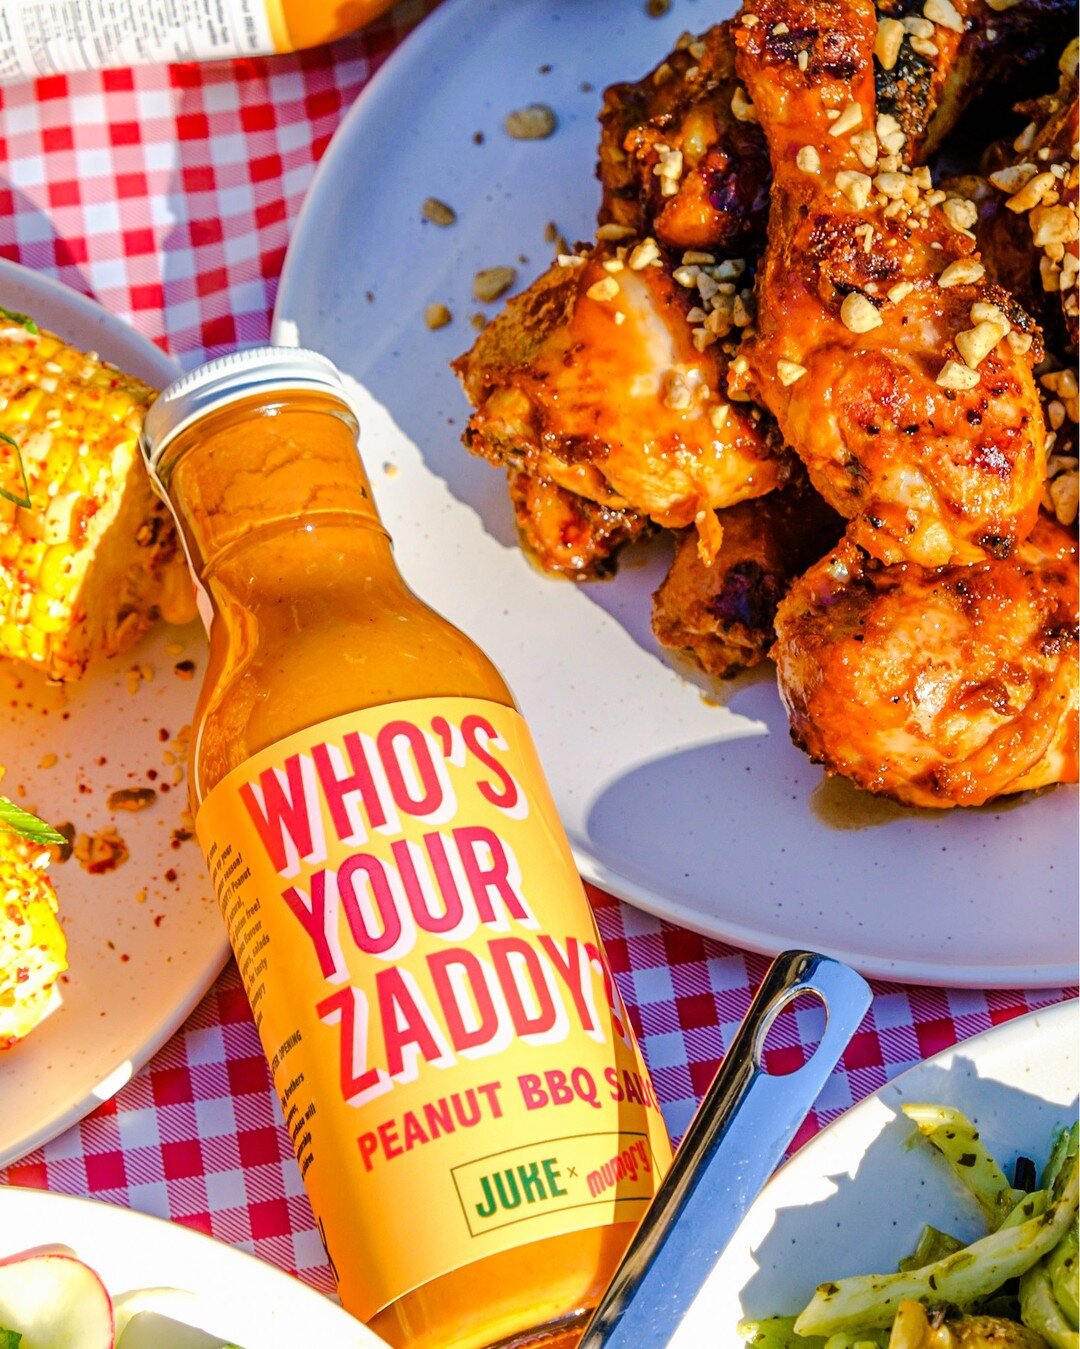 Who's Your Zaddy?

If you don't know, now you know.  Juke X @Mumgry Peanut BBQ Sauce.  Trust, this goes on everything.
.
.
.
.
.
.
.
#whosyourzaddy #ifyoudontknowyouknow #mumgry  #jukefriedchicken #eastvan #supportblackowned #bbqsauce #chinatownyvr #